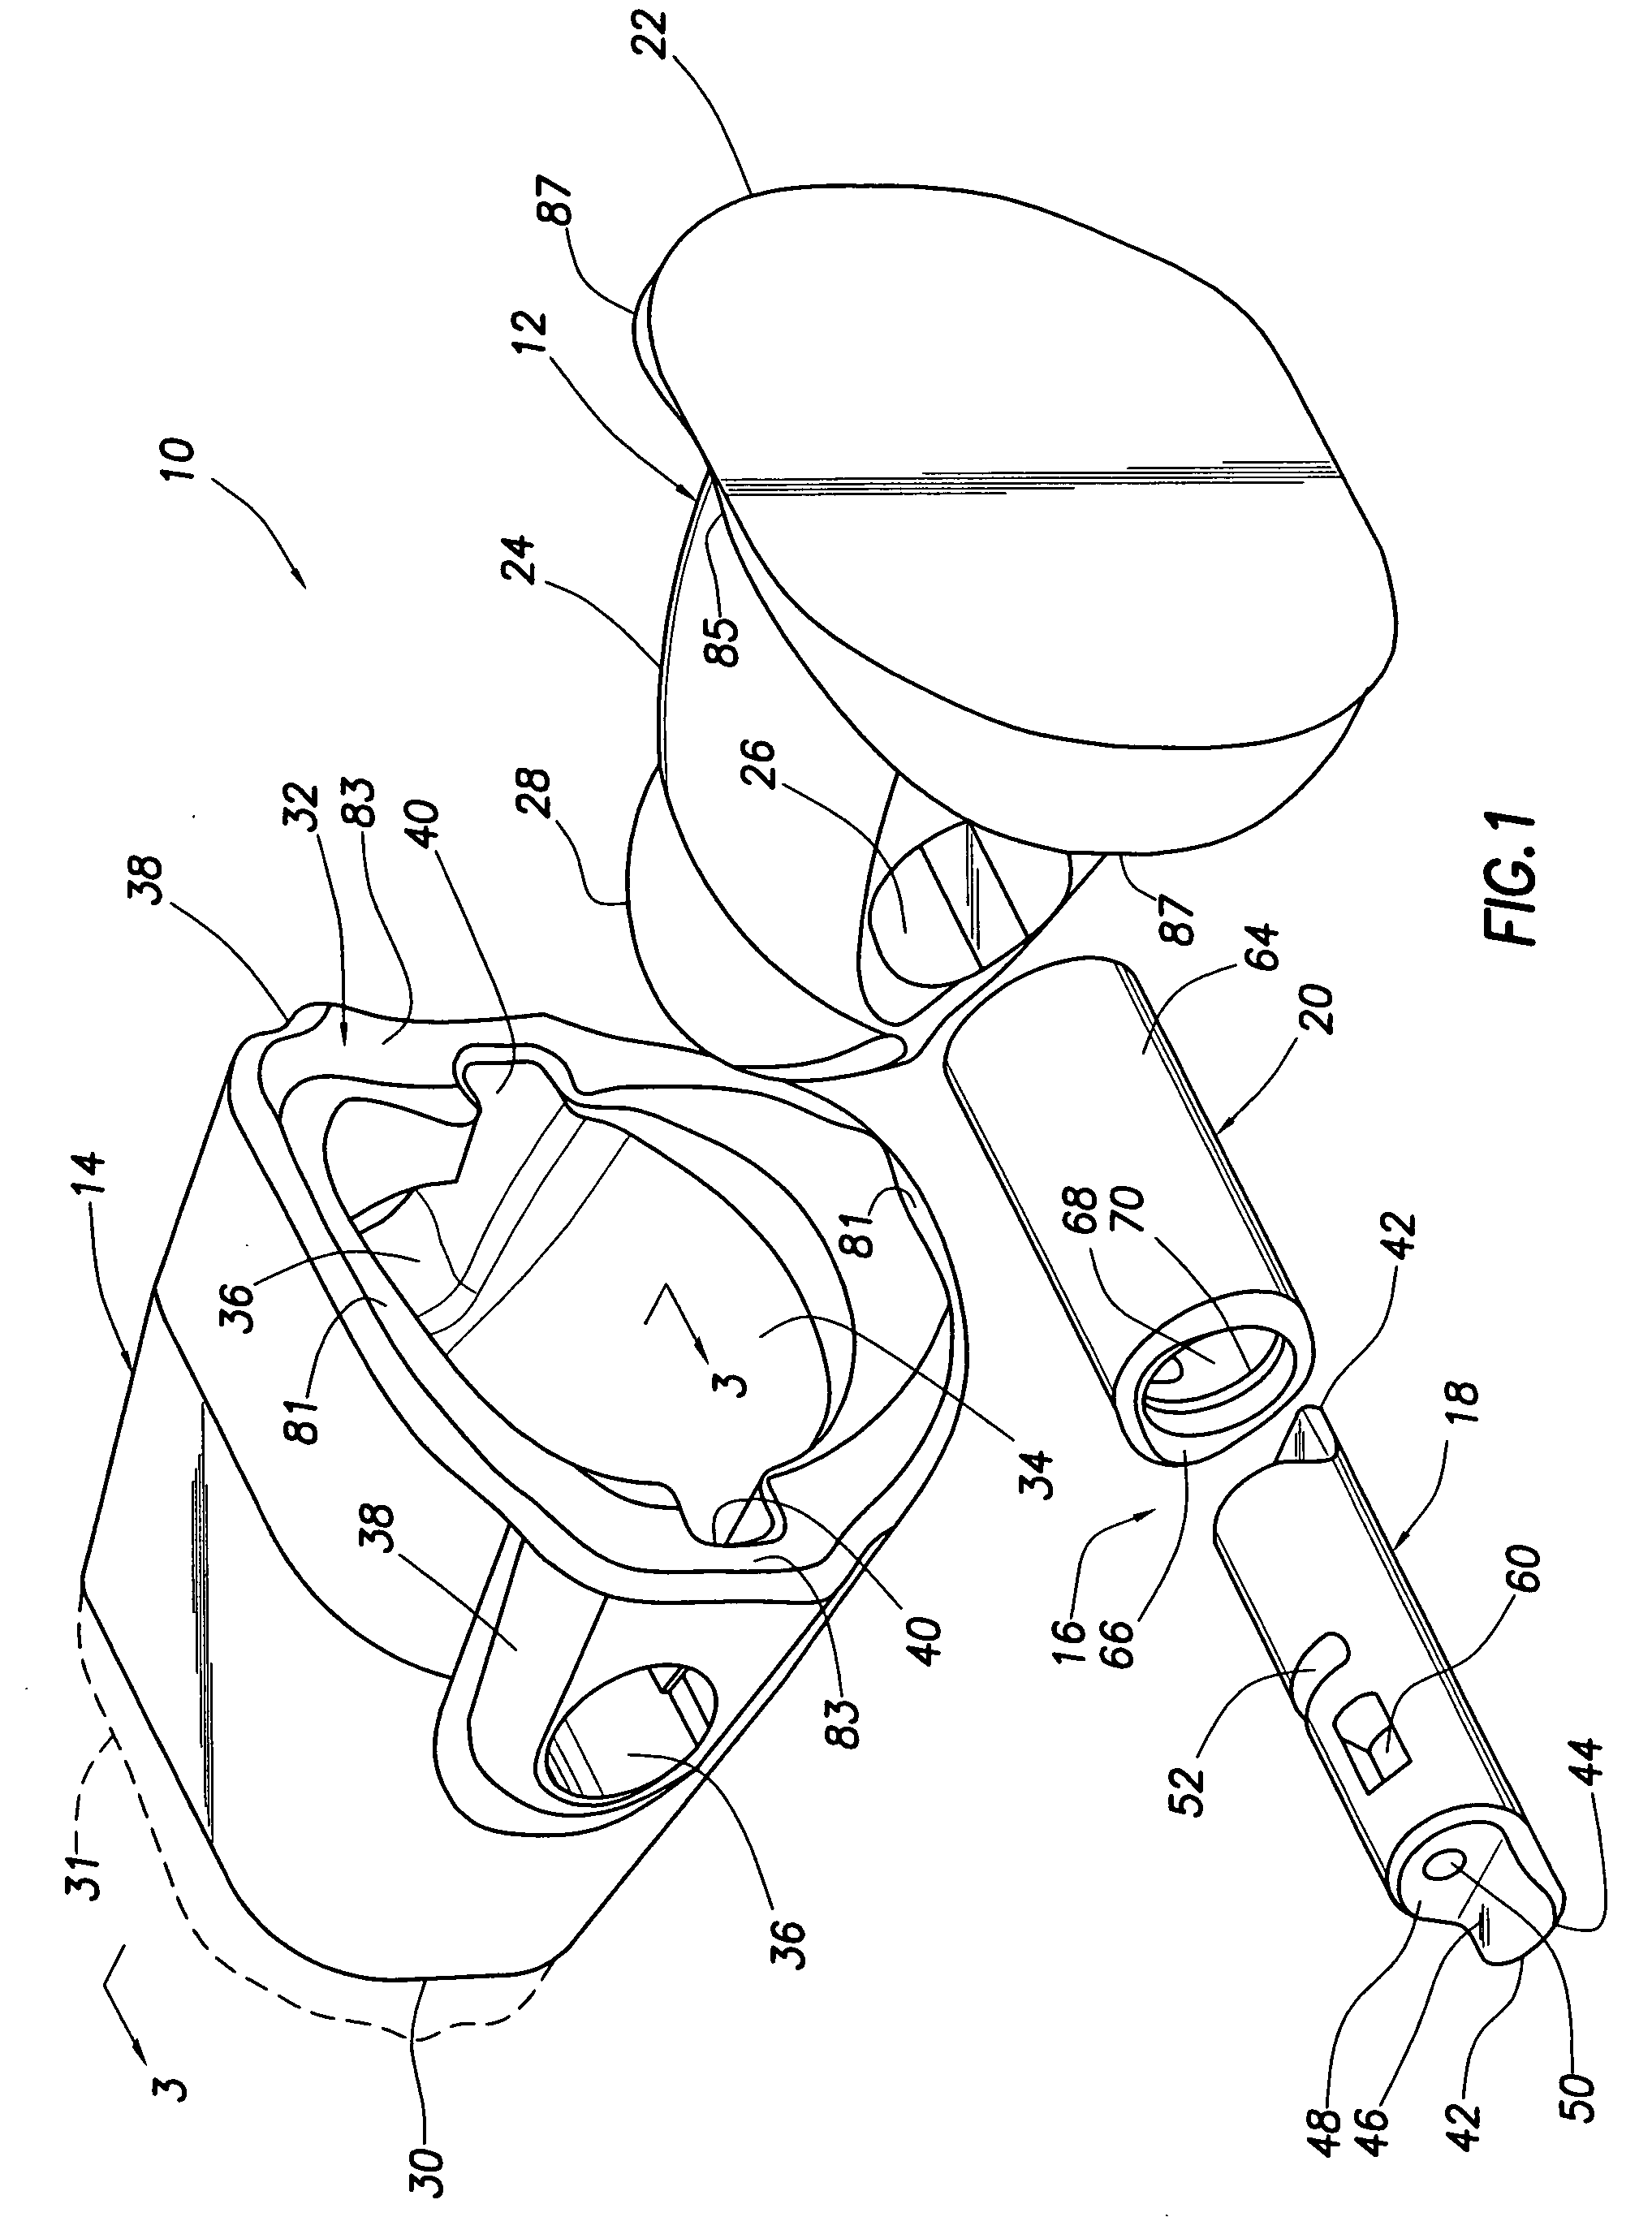 Excavating tooth assembly with rotatable connector pin structure